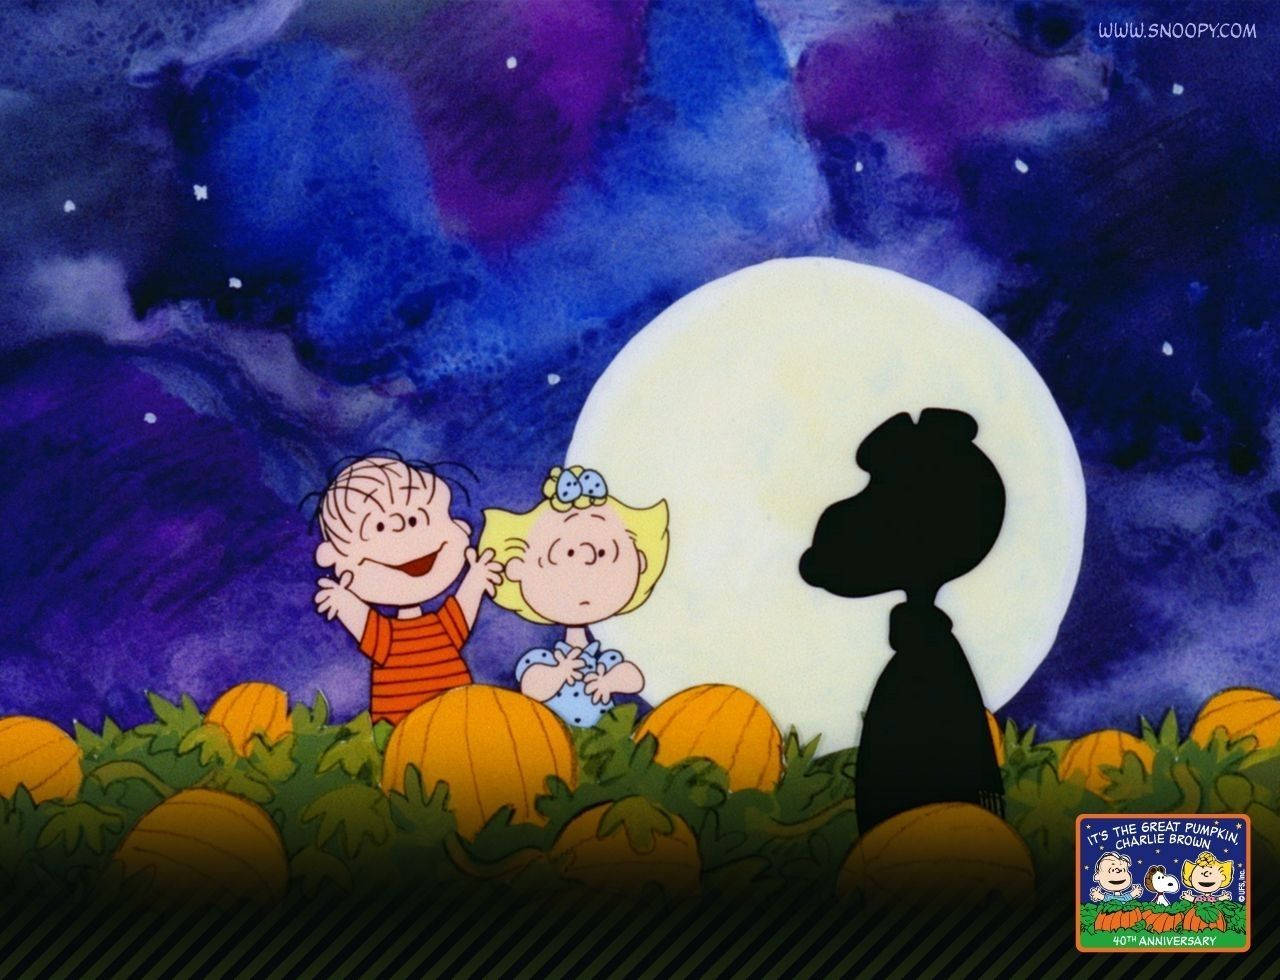 Celebrate Halloween in style with Snoopy! Wallpaper